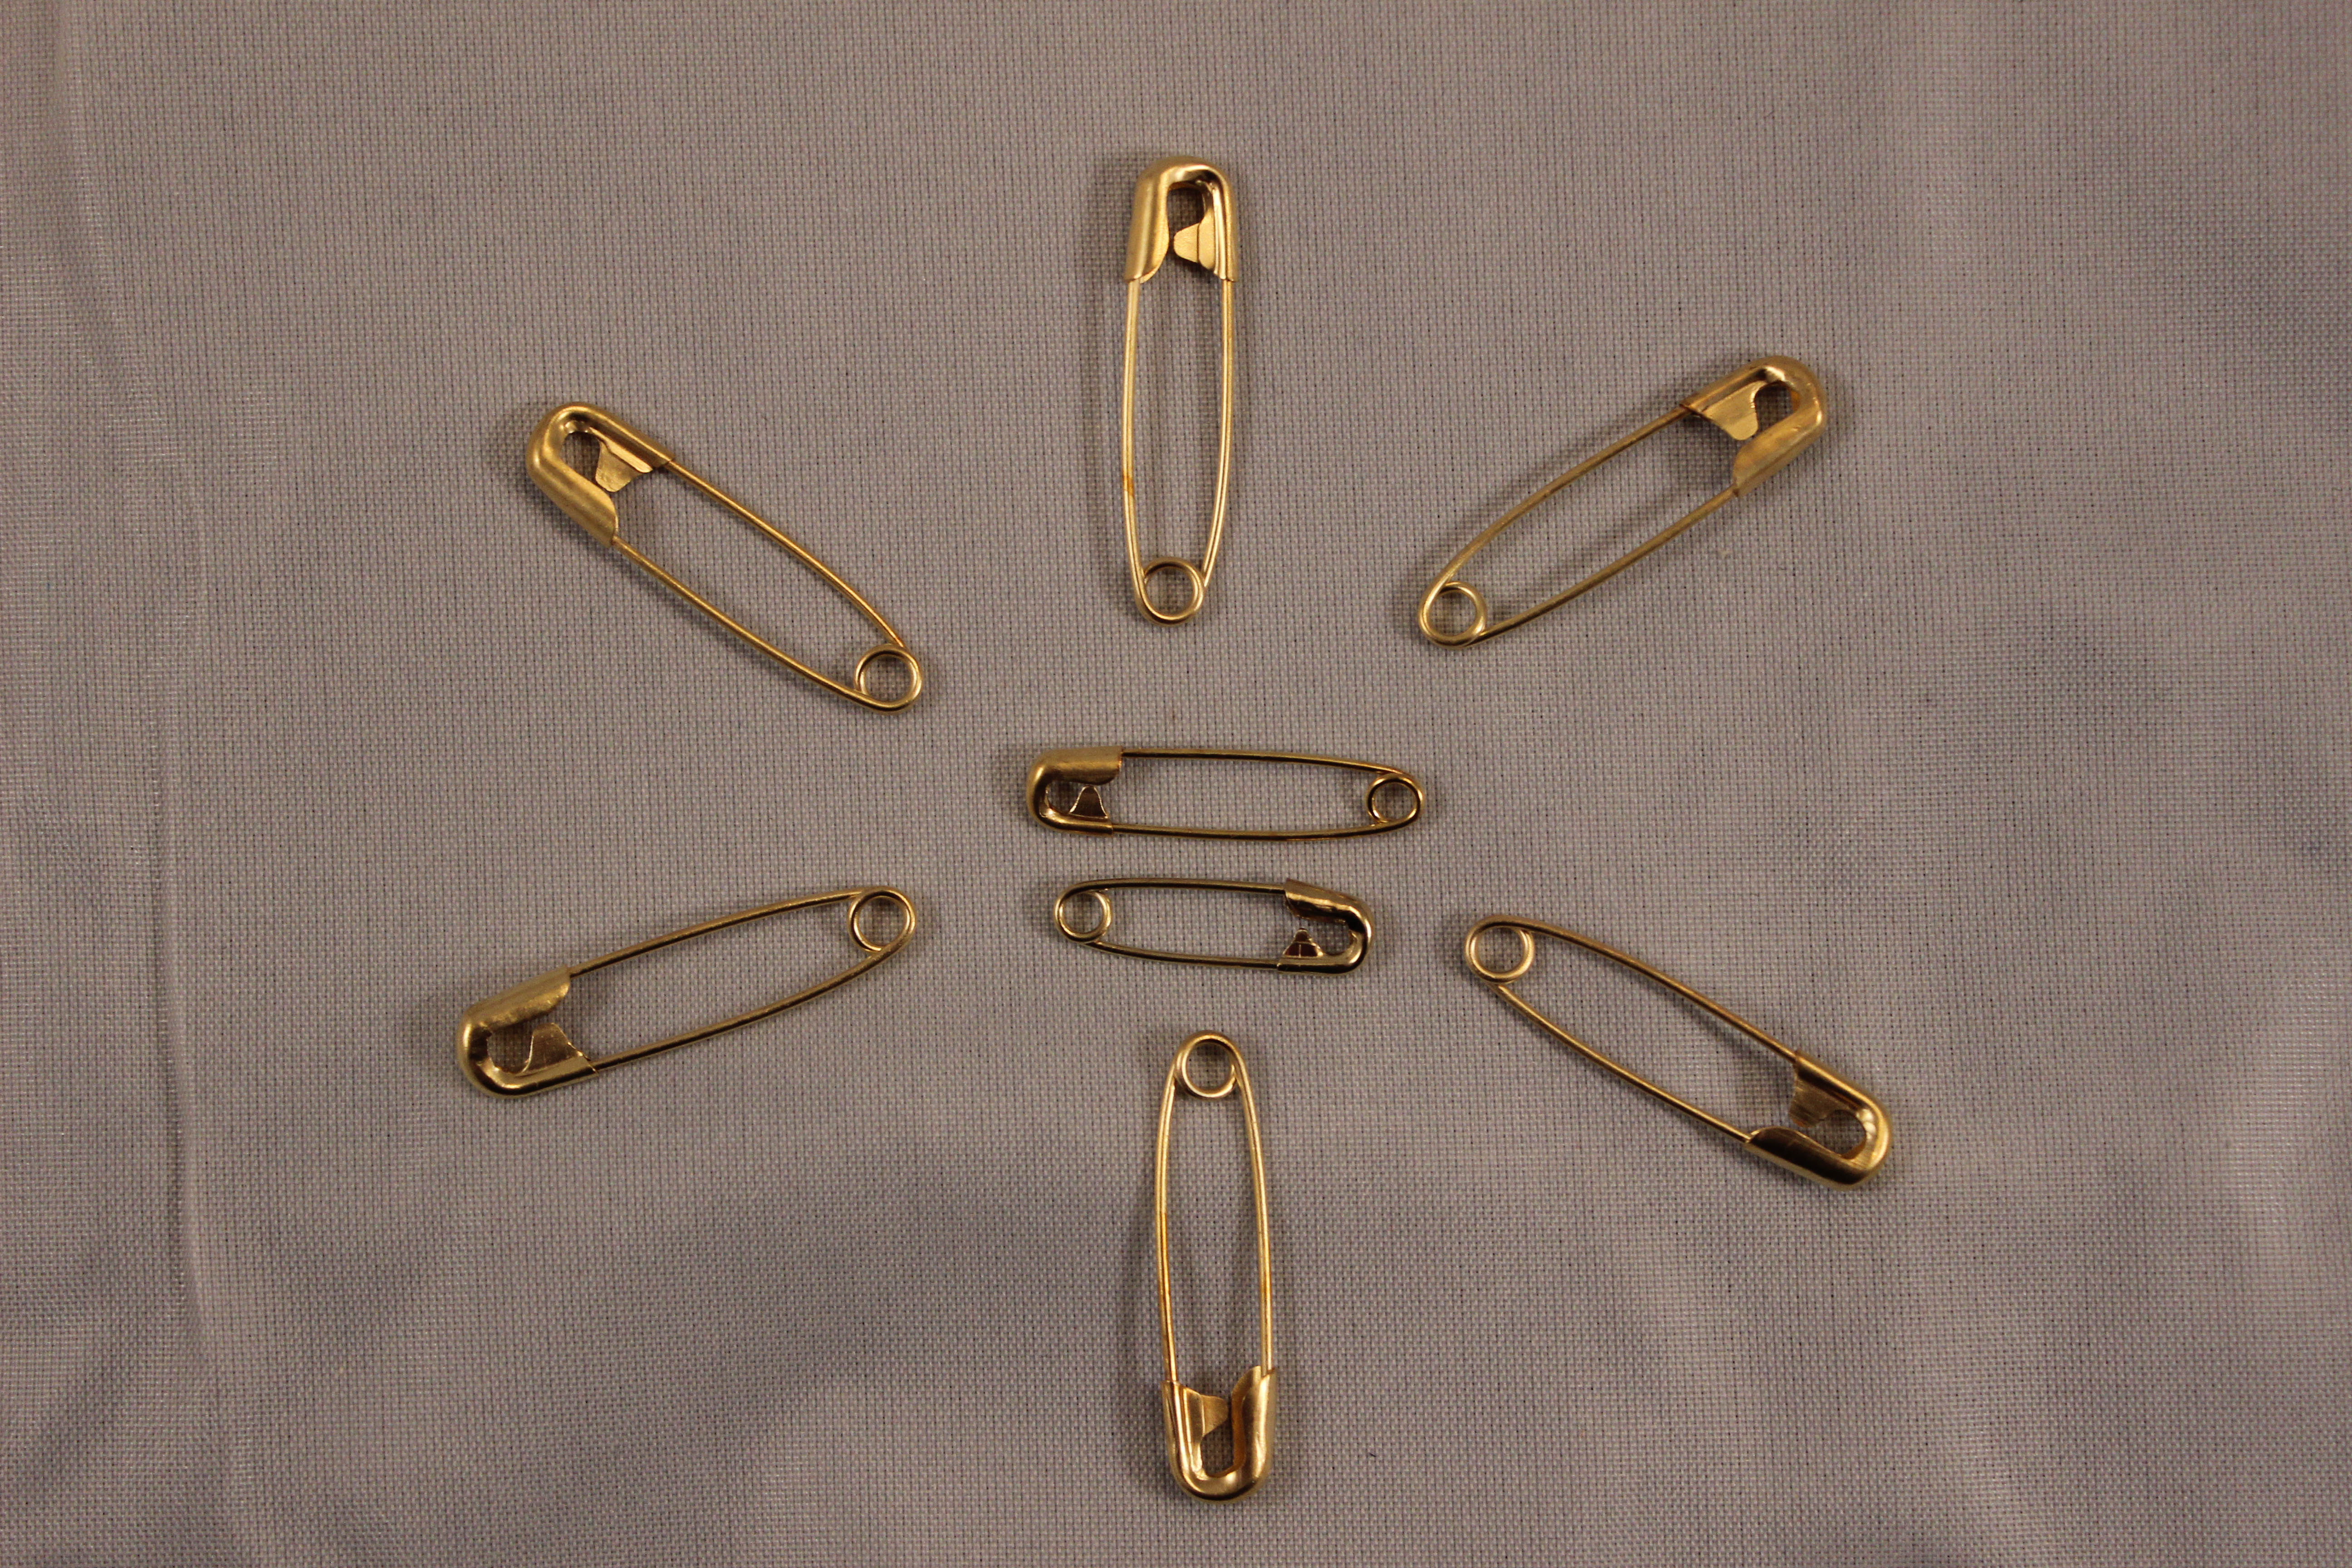 Colored safety pins Stock Photo